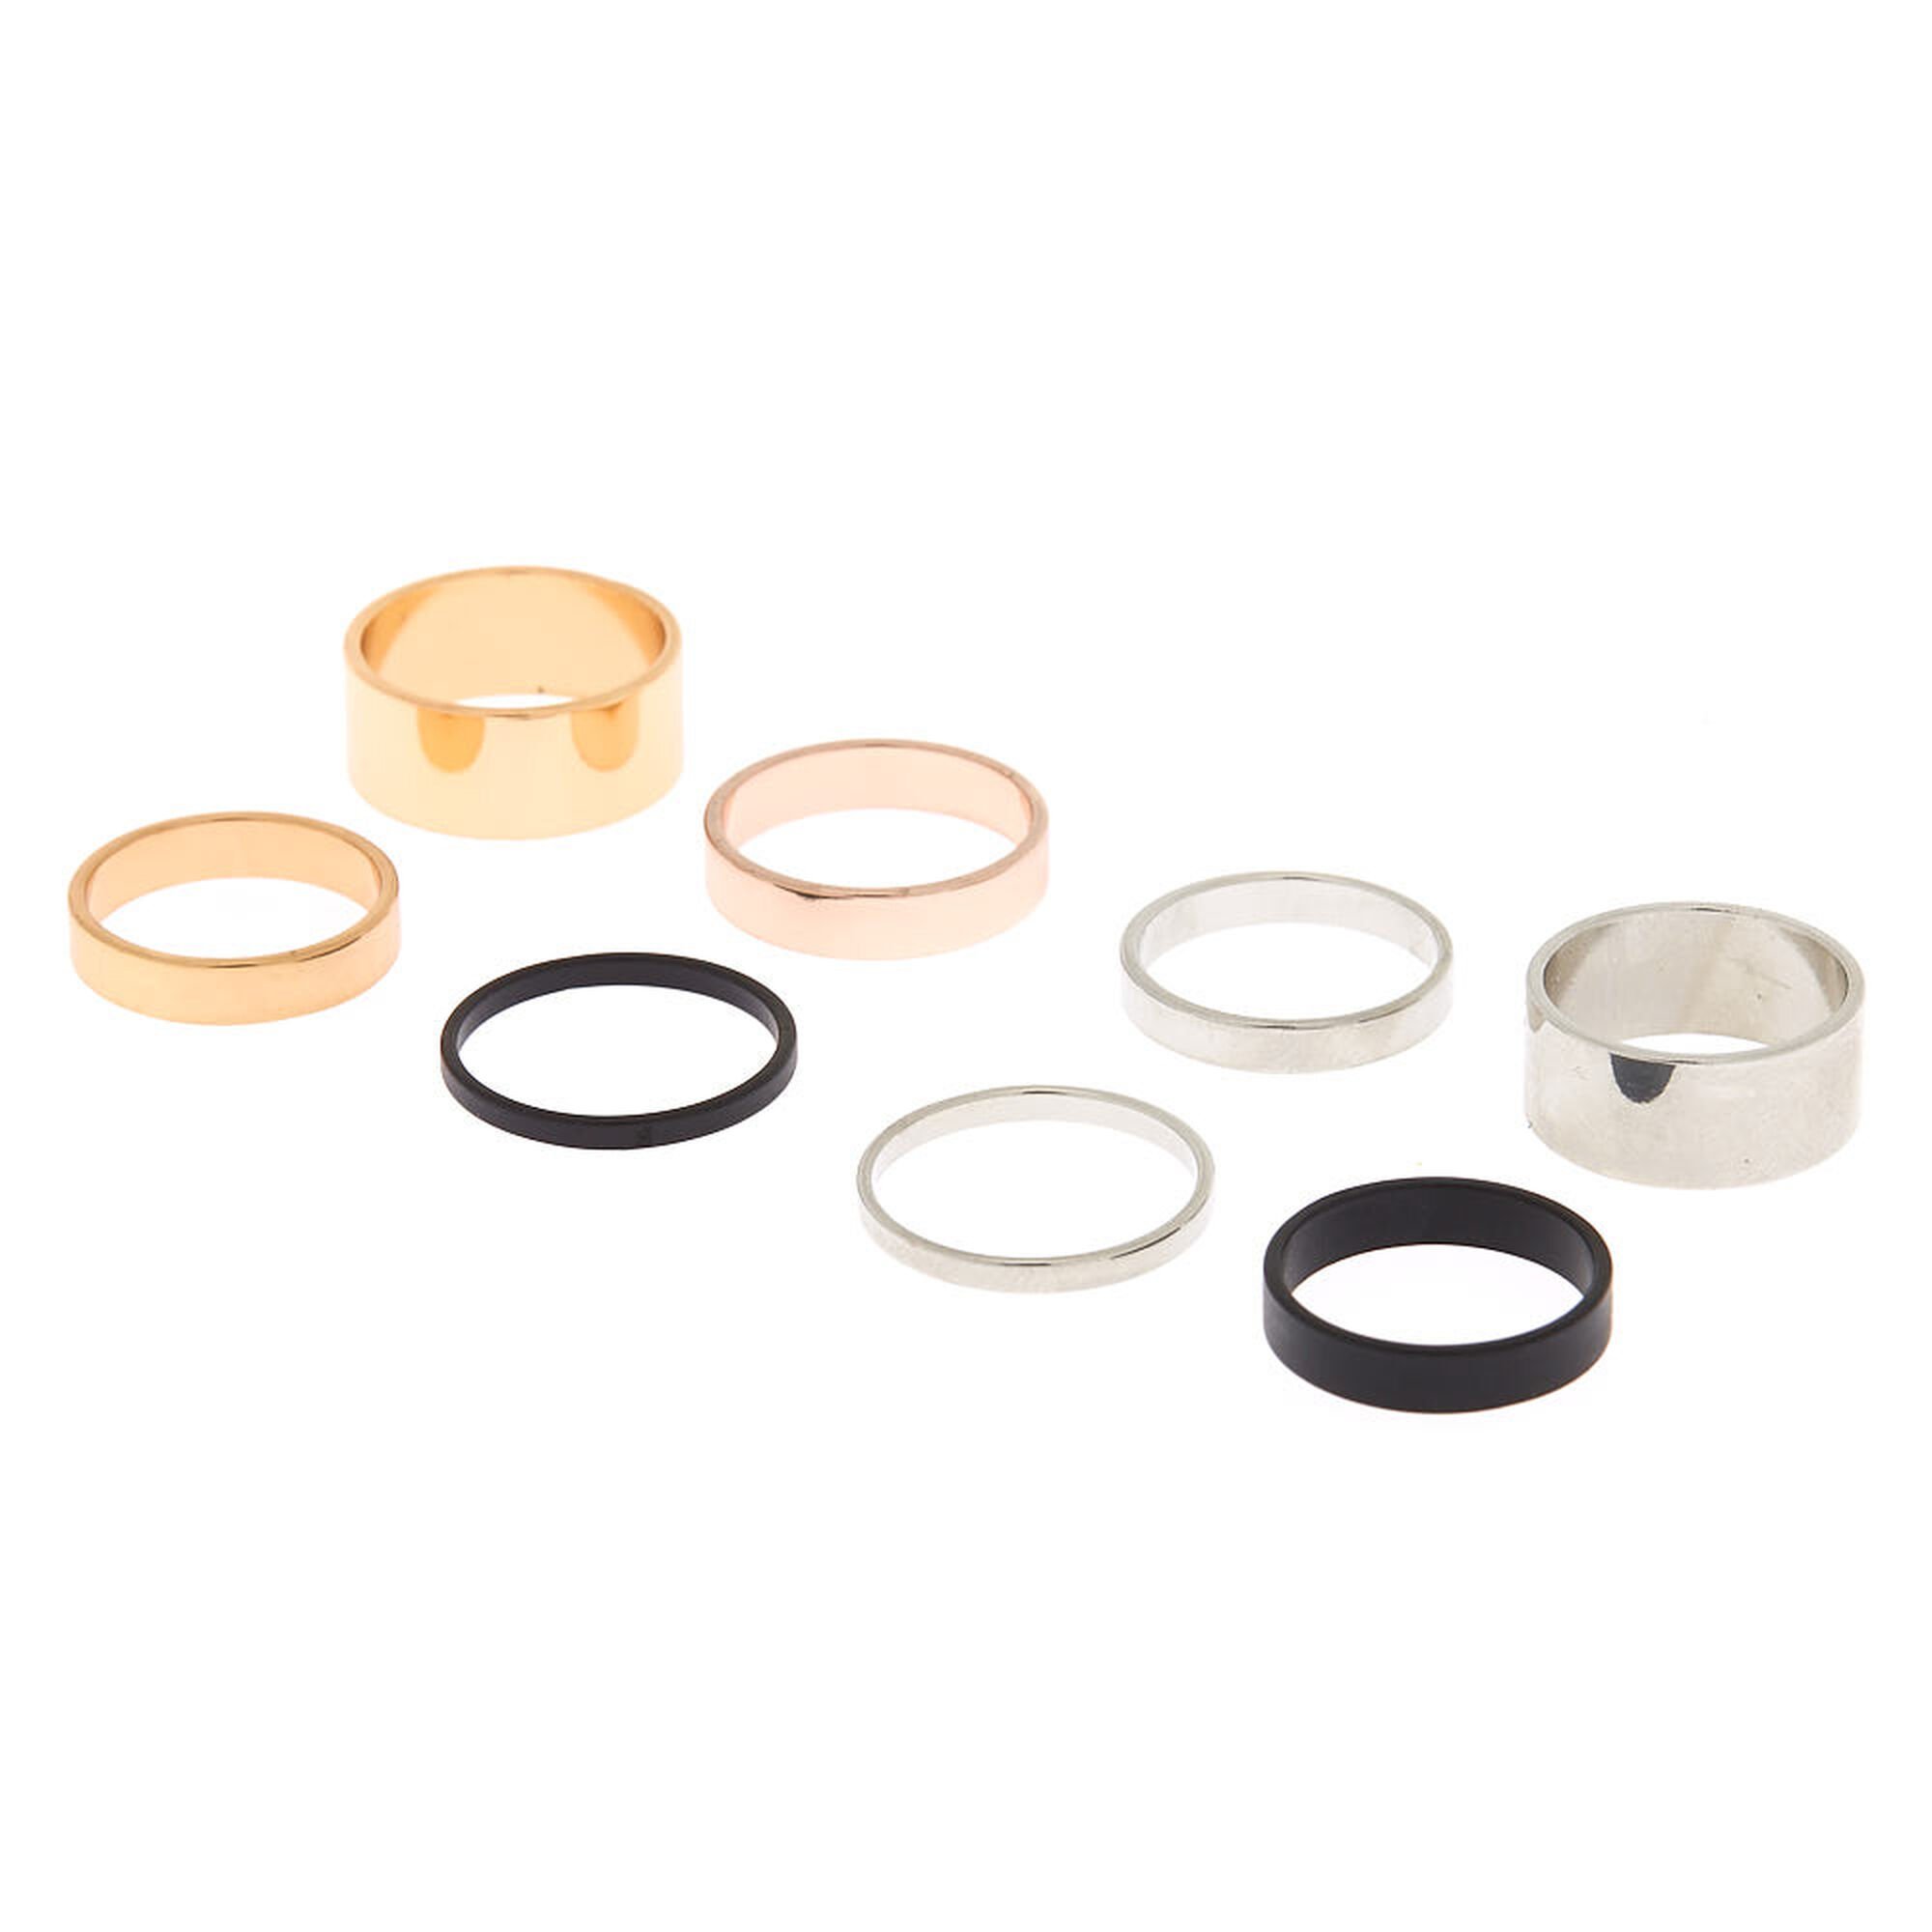 View Claires Mixed Metallic Band Rings 8 Pack Gold information